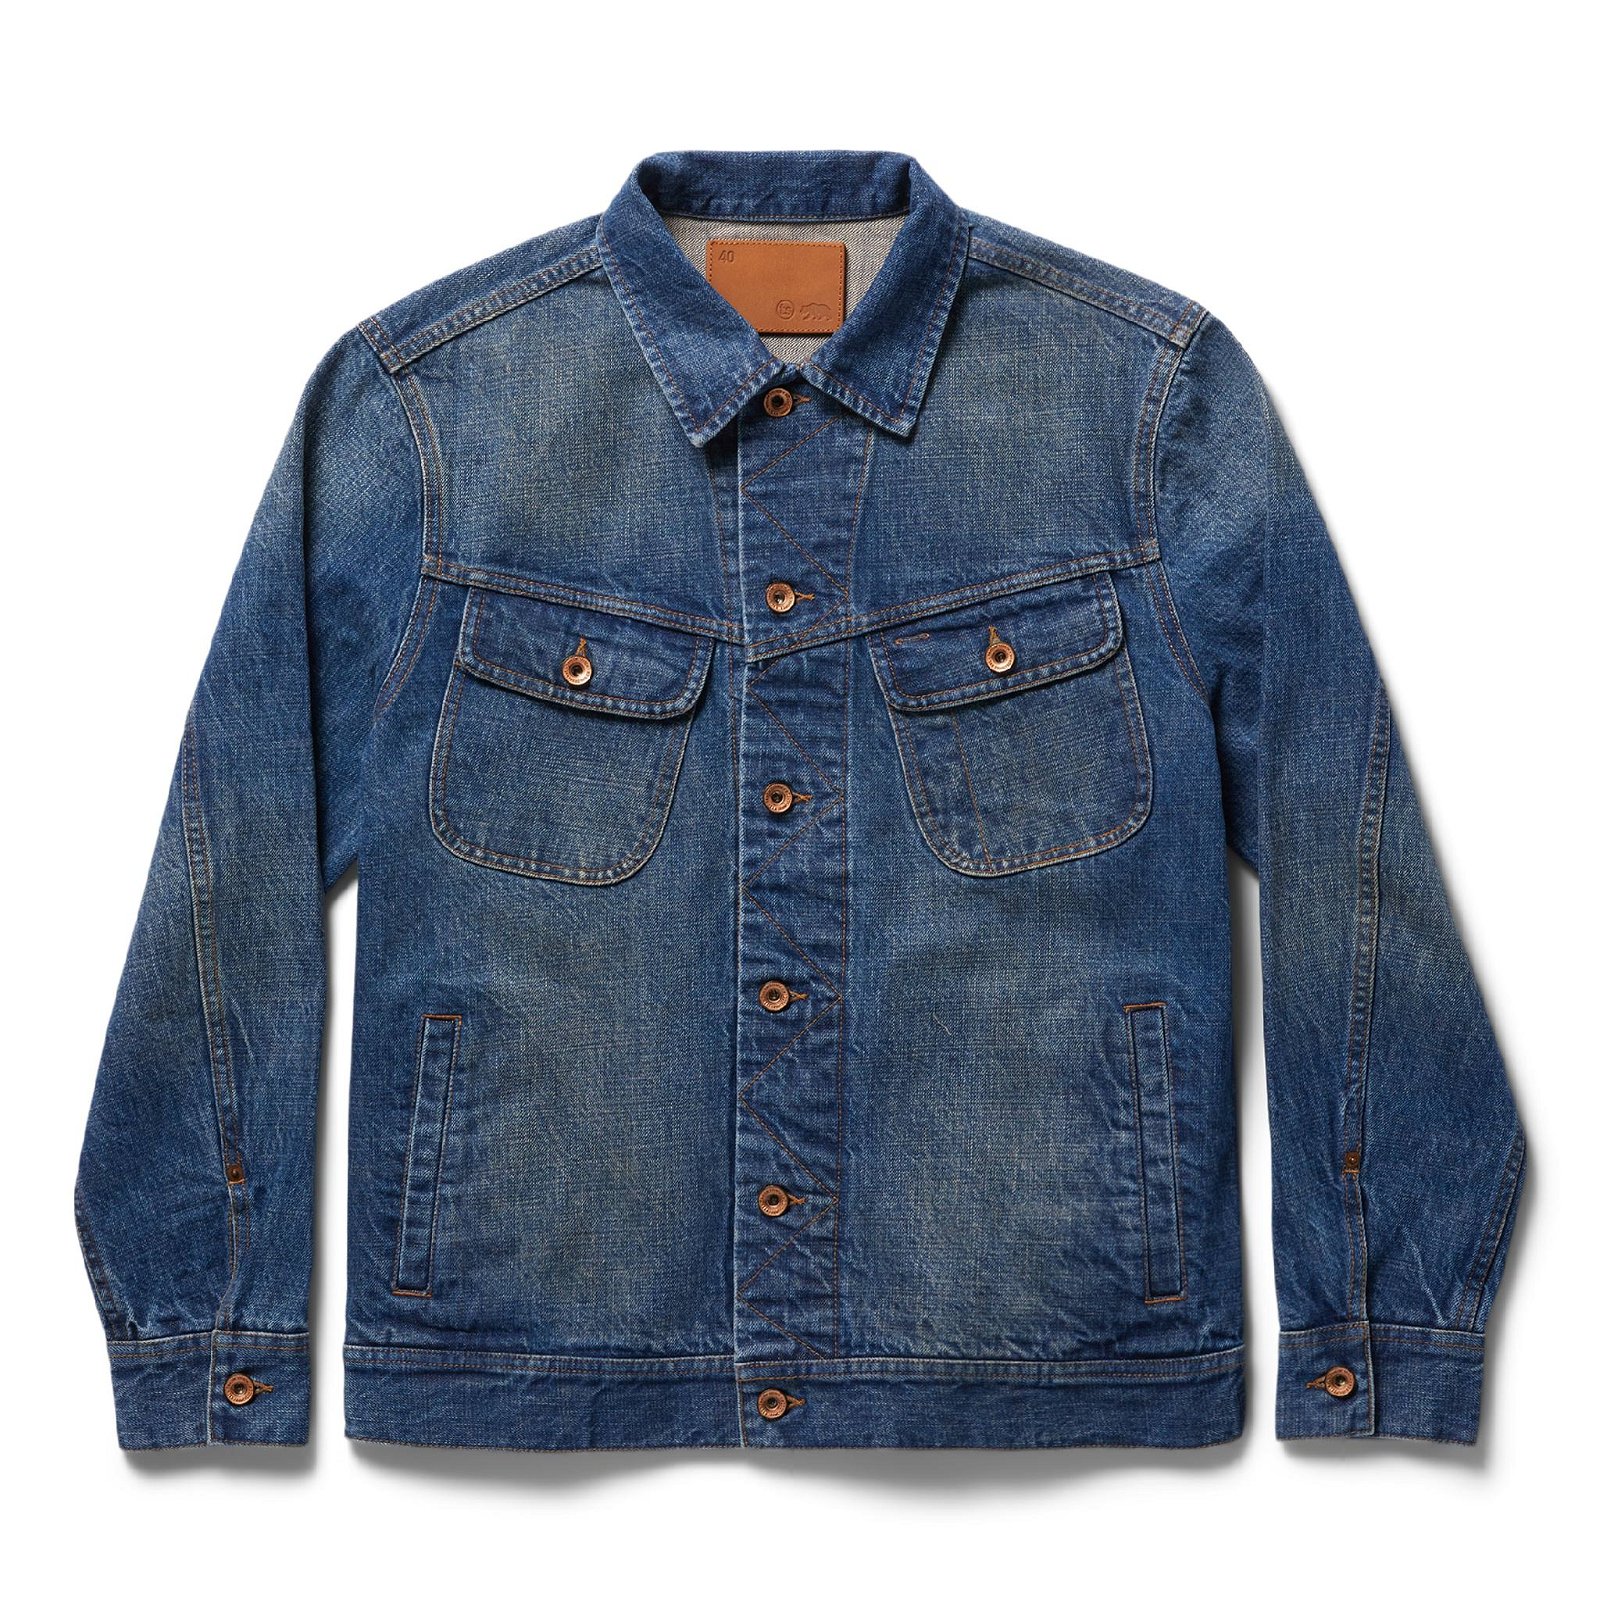 Image of The Long Haul Jacket in Sawyer Wash Organic Selvage